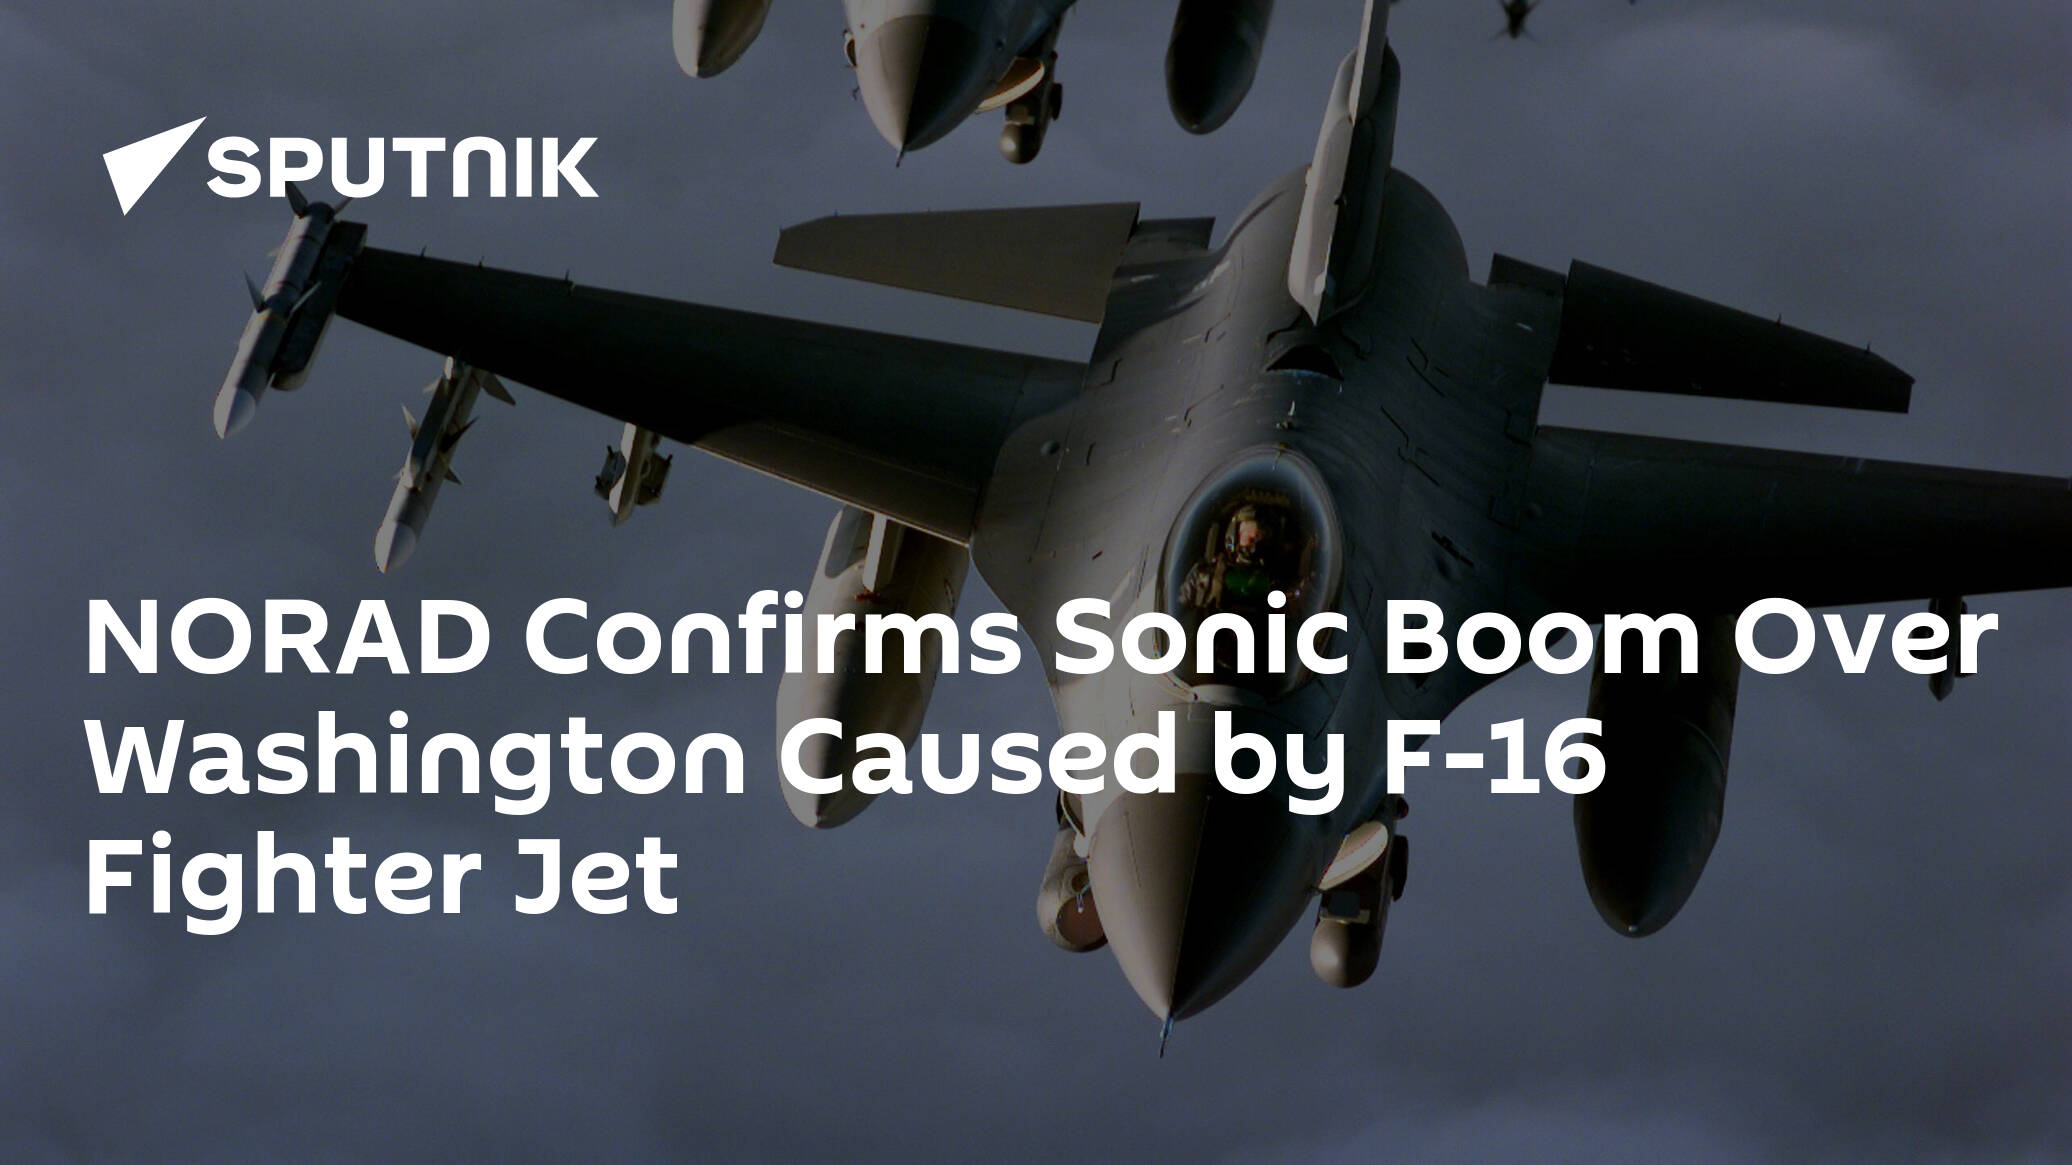 NORAD Confirms Sonic Boom Over Washington Caused by F-16 Fighter Jet